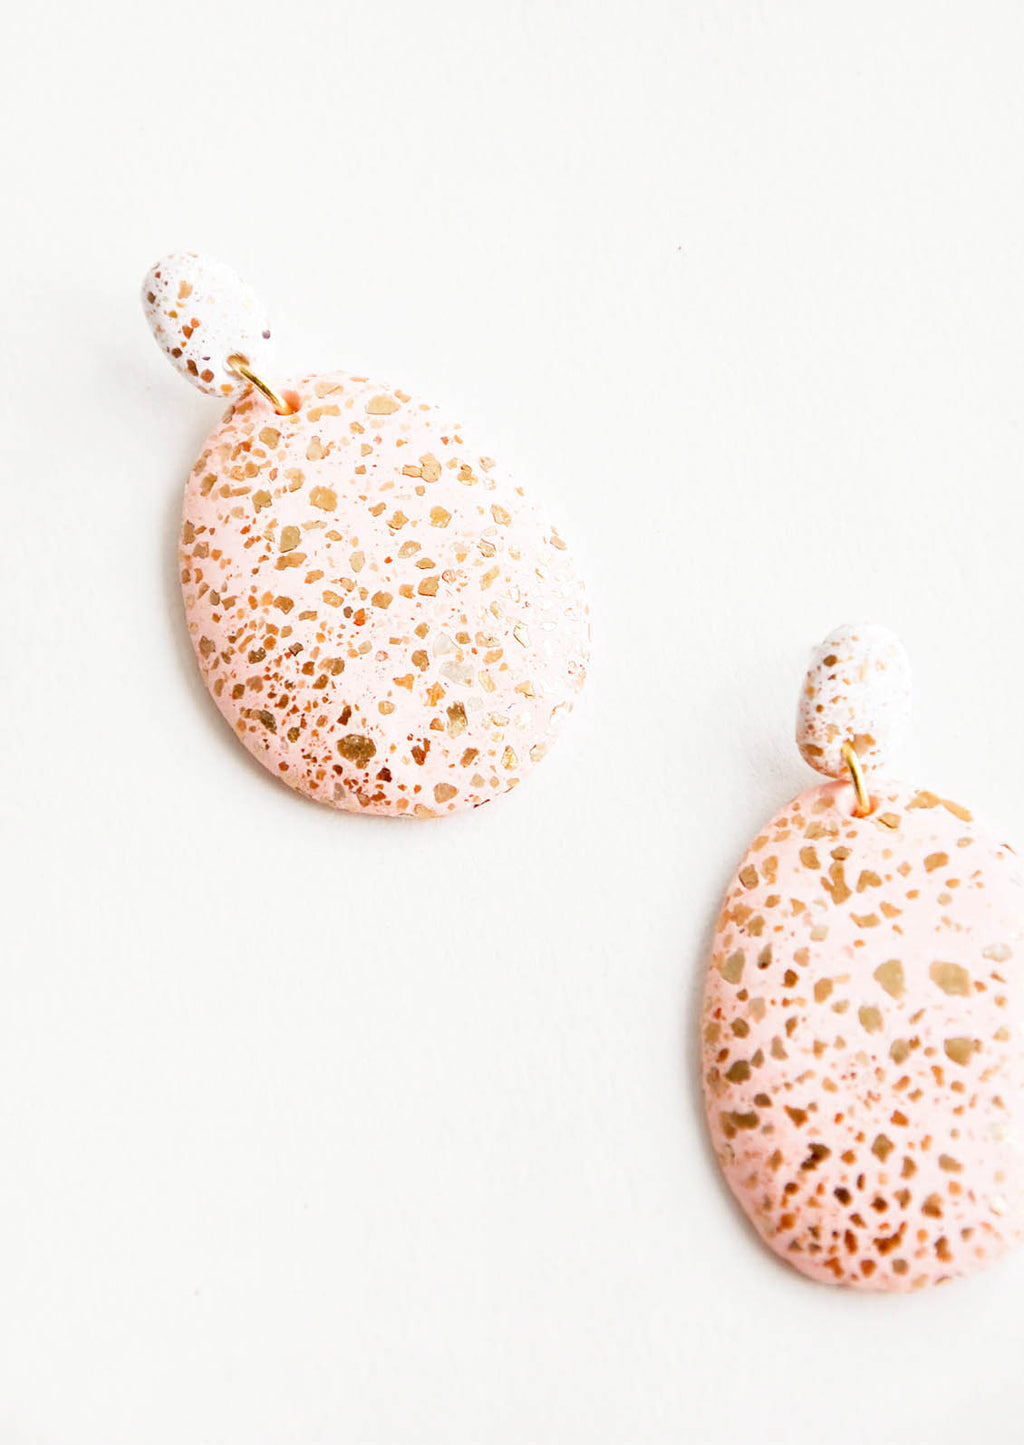 Blush / White: Dangling glitter covered earrings, with a blush pink larger oval dangling from a small white bead.